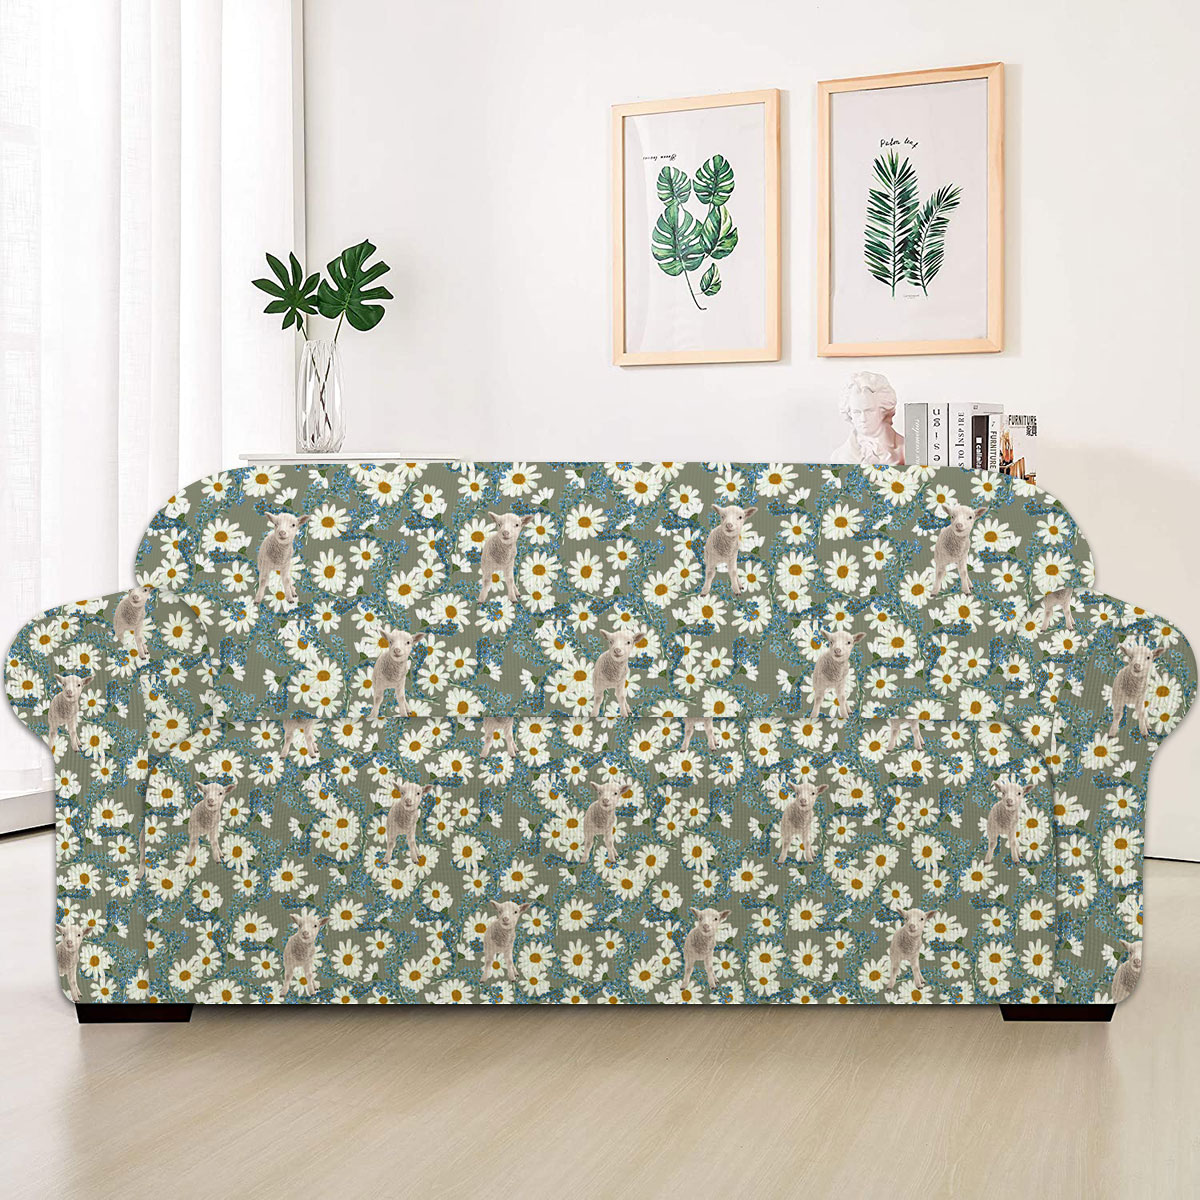 Sheep Camomilles Flower Grey Pattern Sofa Cover